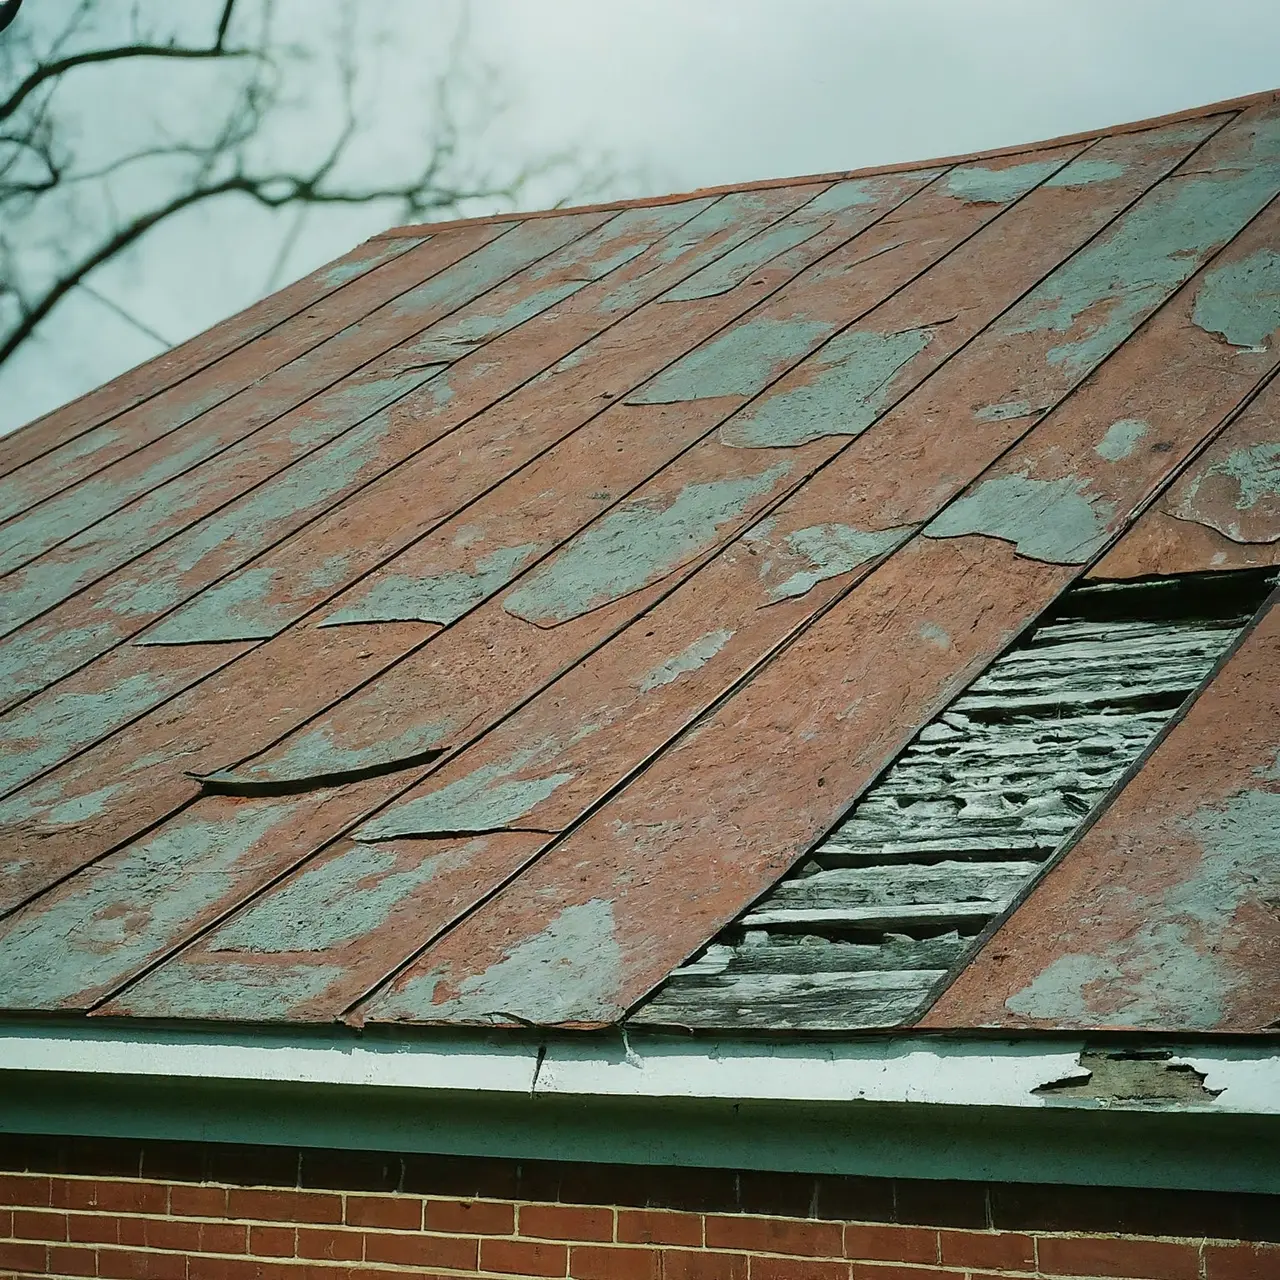 A worn-out roof on a residential house in Martinsburg, WV. 35mm stock photo